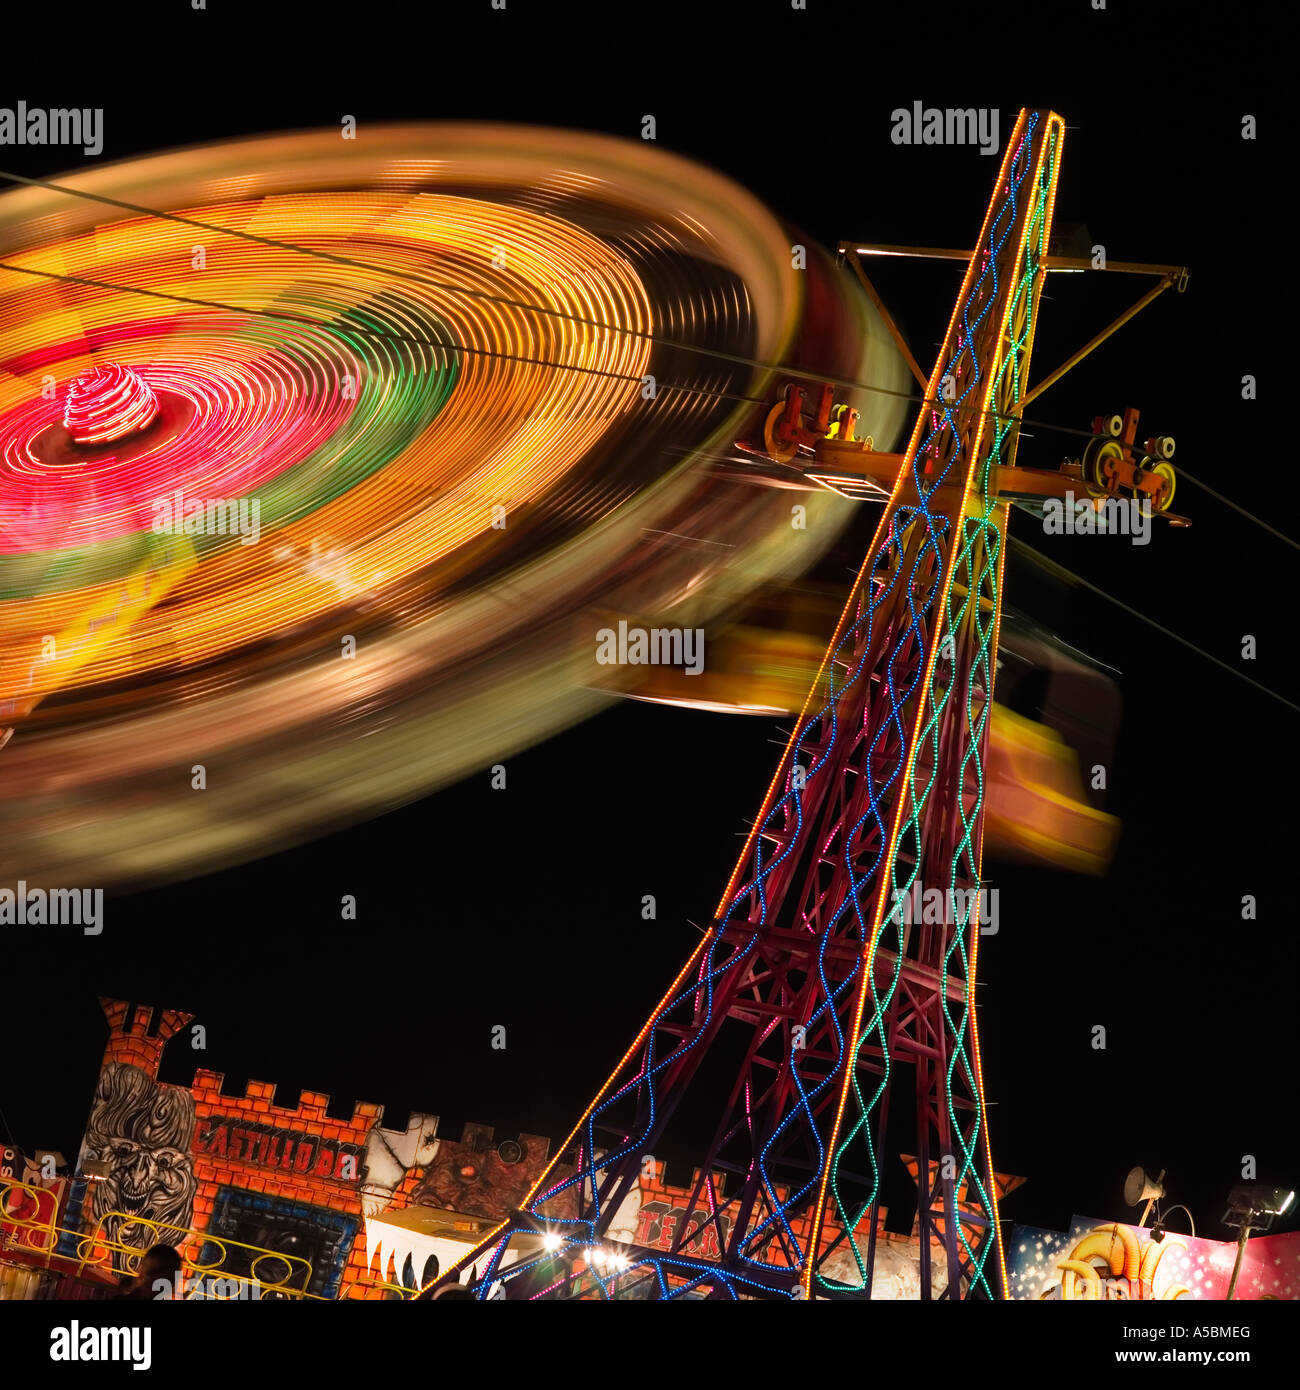 fairground ride the spinning wheel in action surreal weird unusual image concept greeting card idea Stock Photo